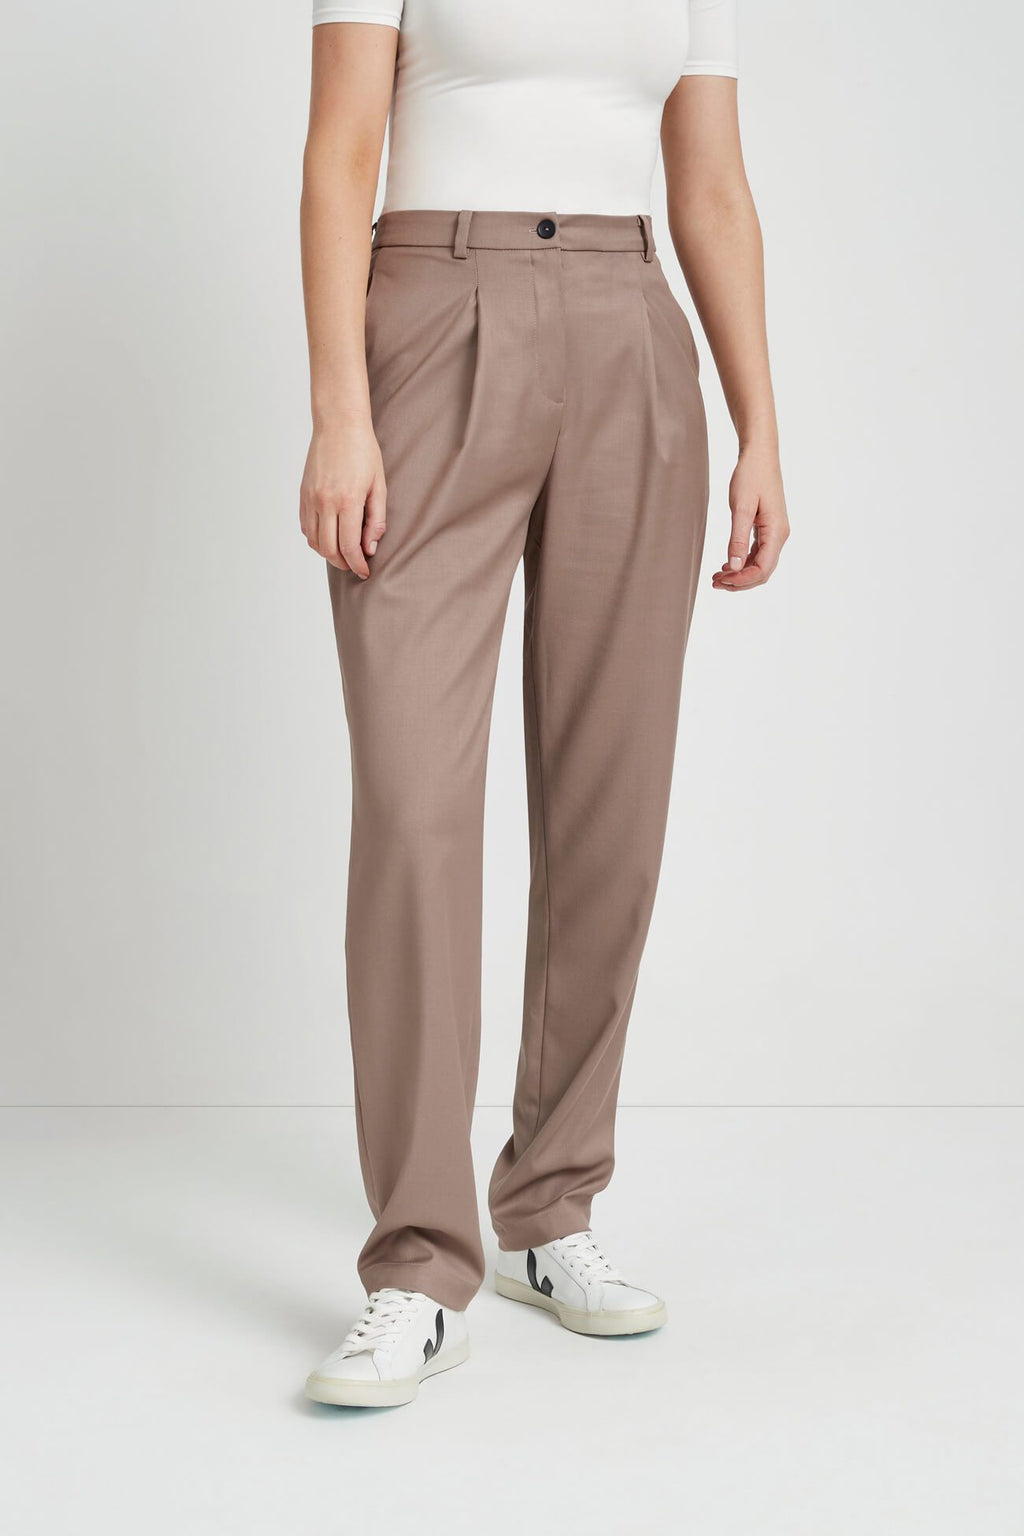 Taupe gray high waisted pleated lightweight wrinkle-free stretch Dress Pants